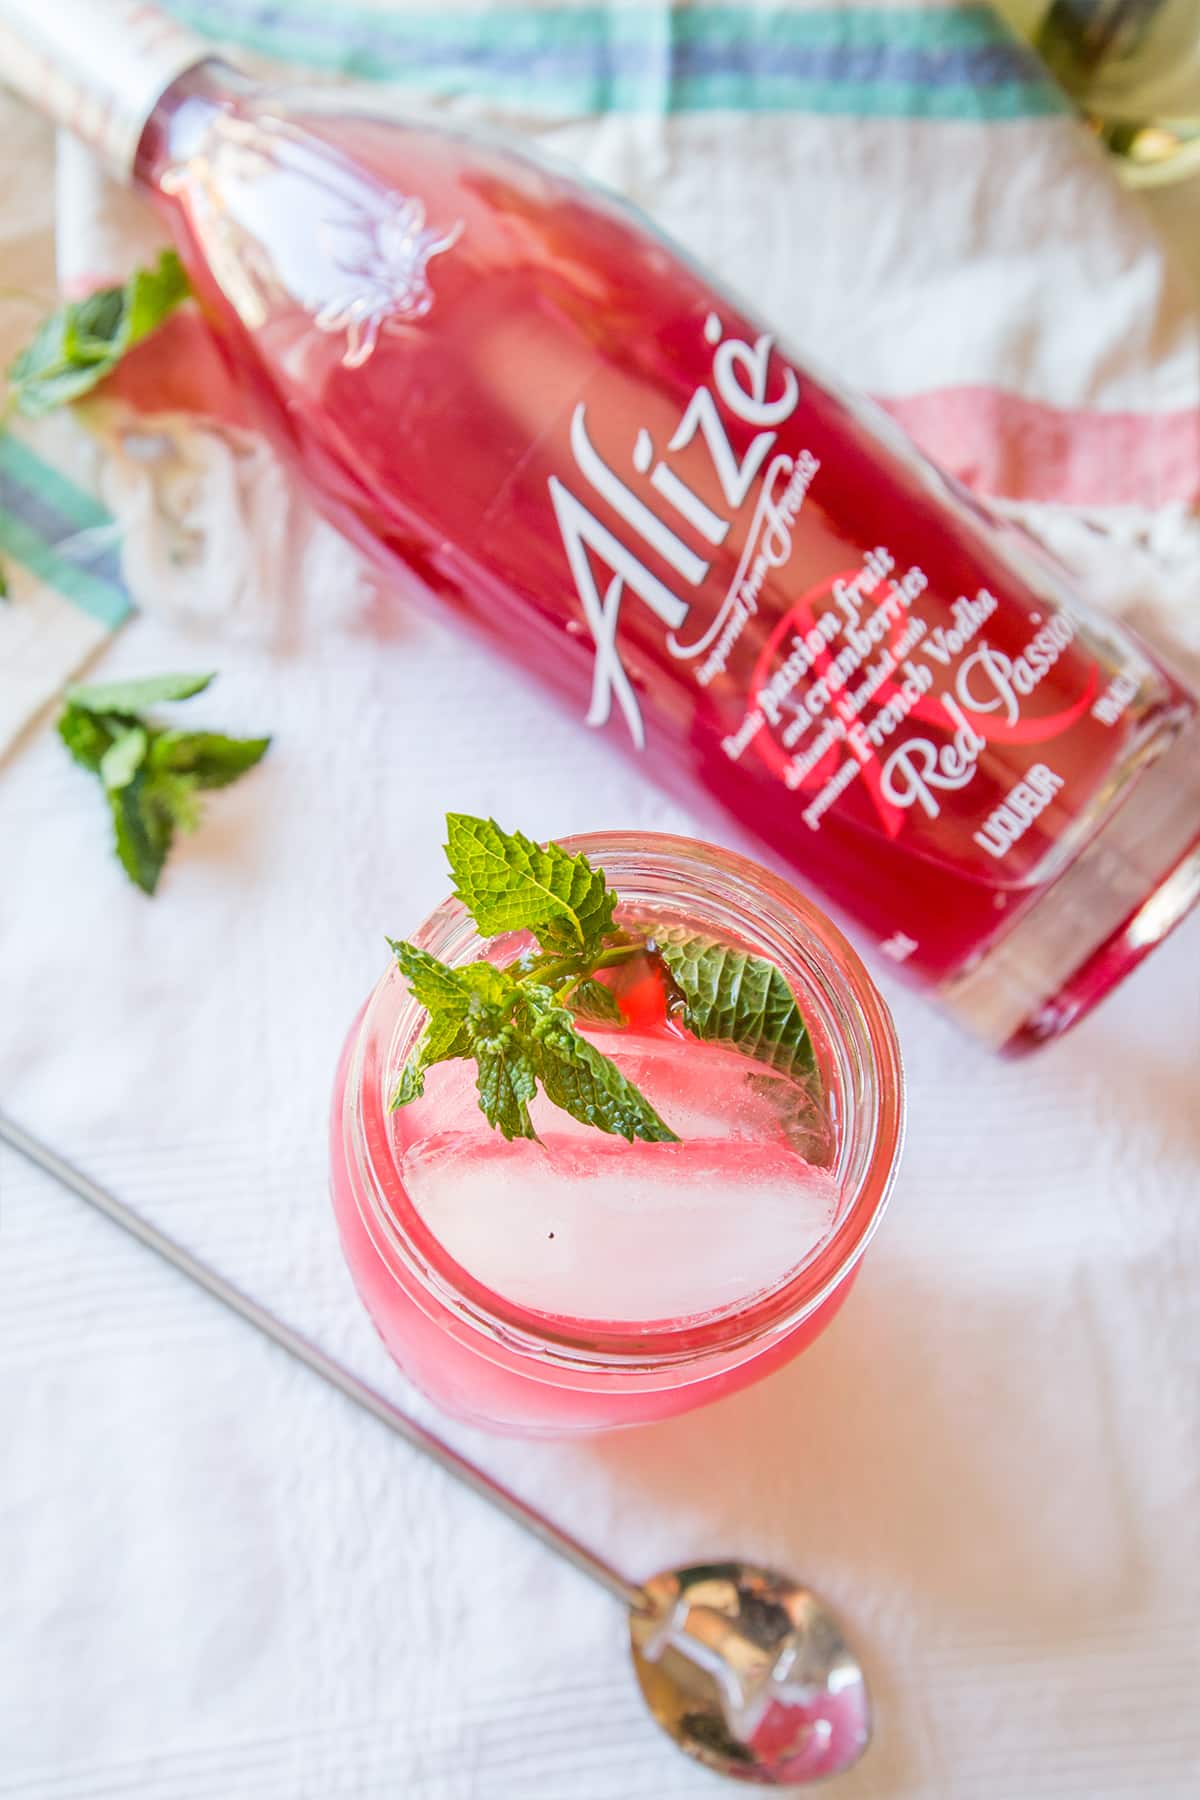 Yummy! Love this minty shortcake cocktail recipe!